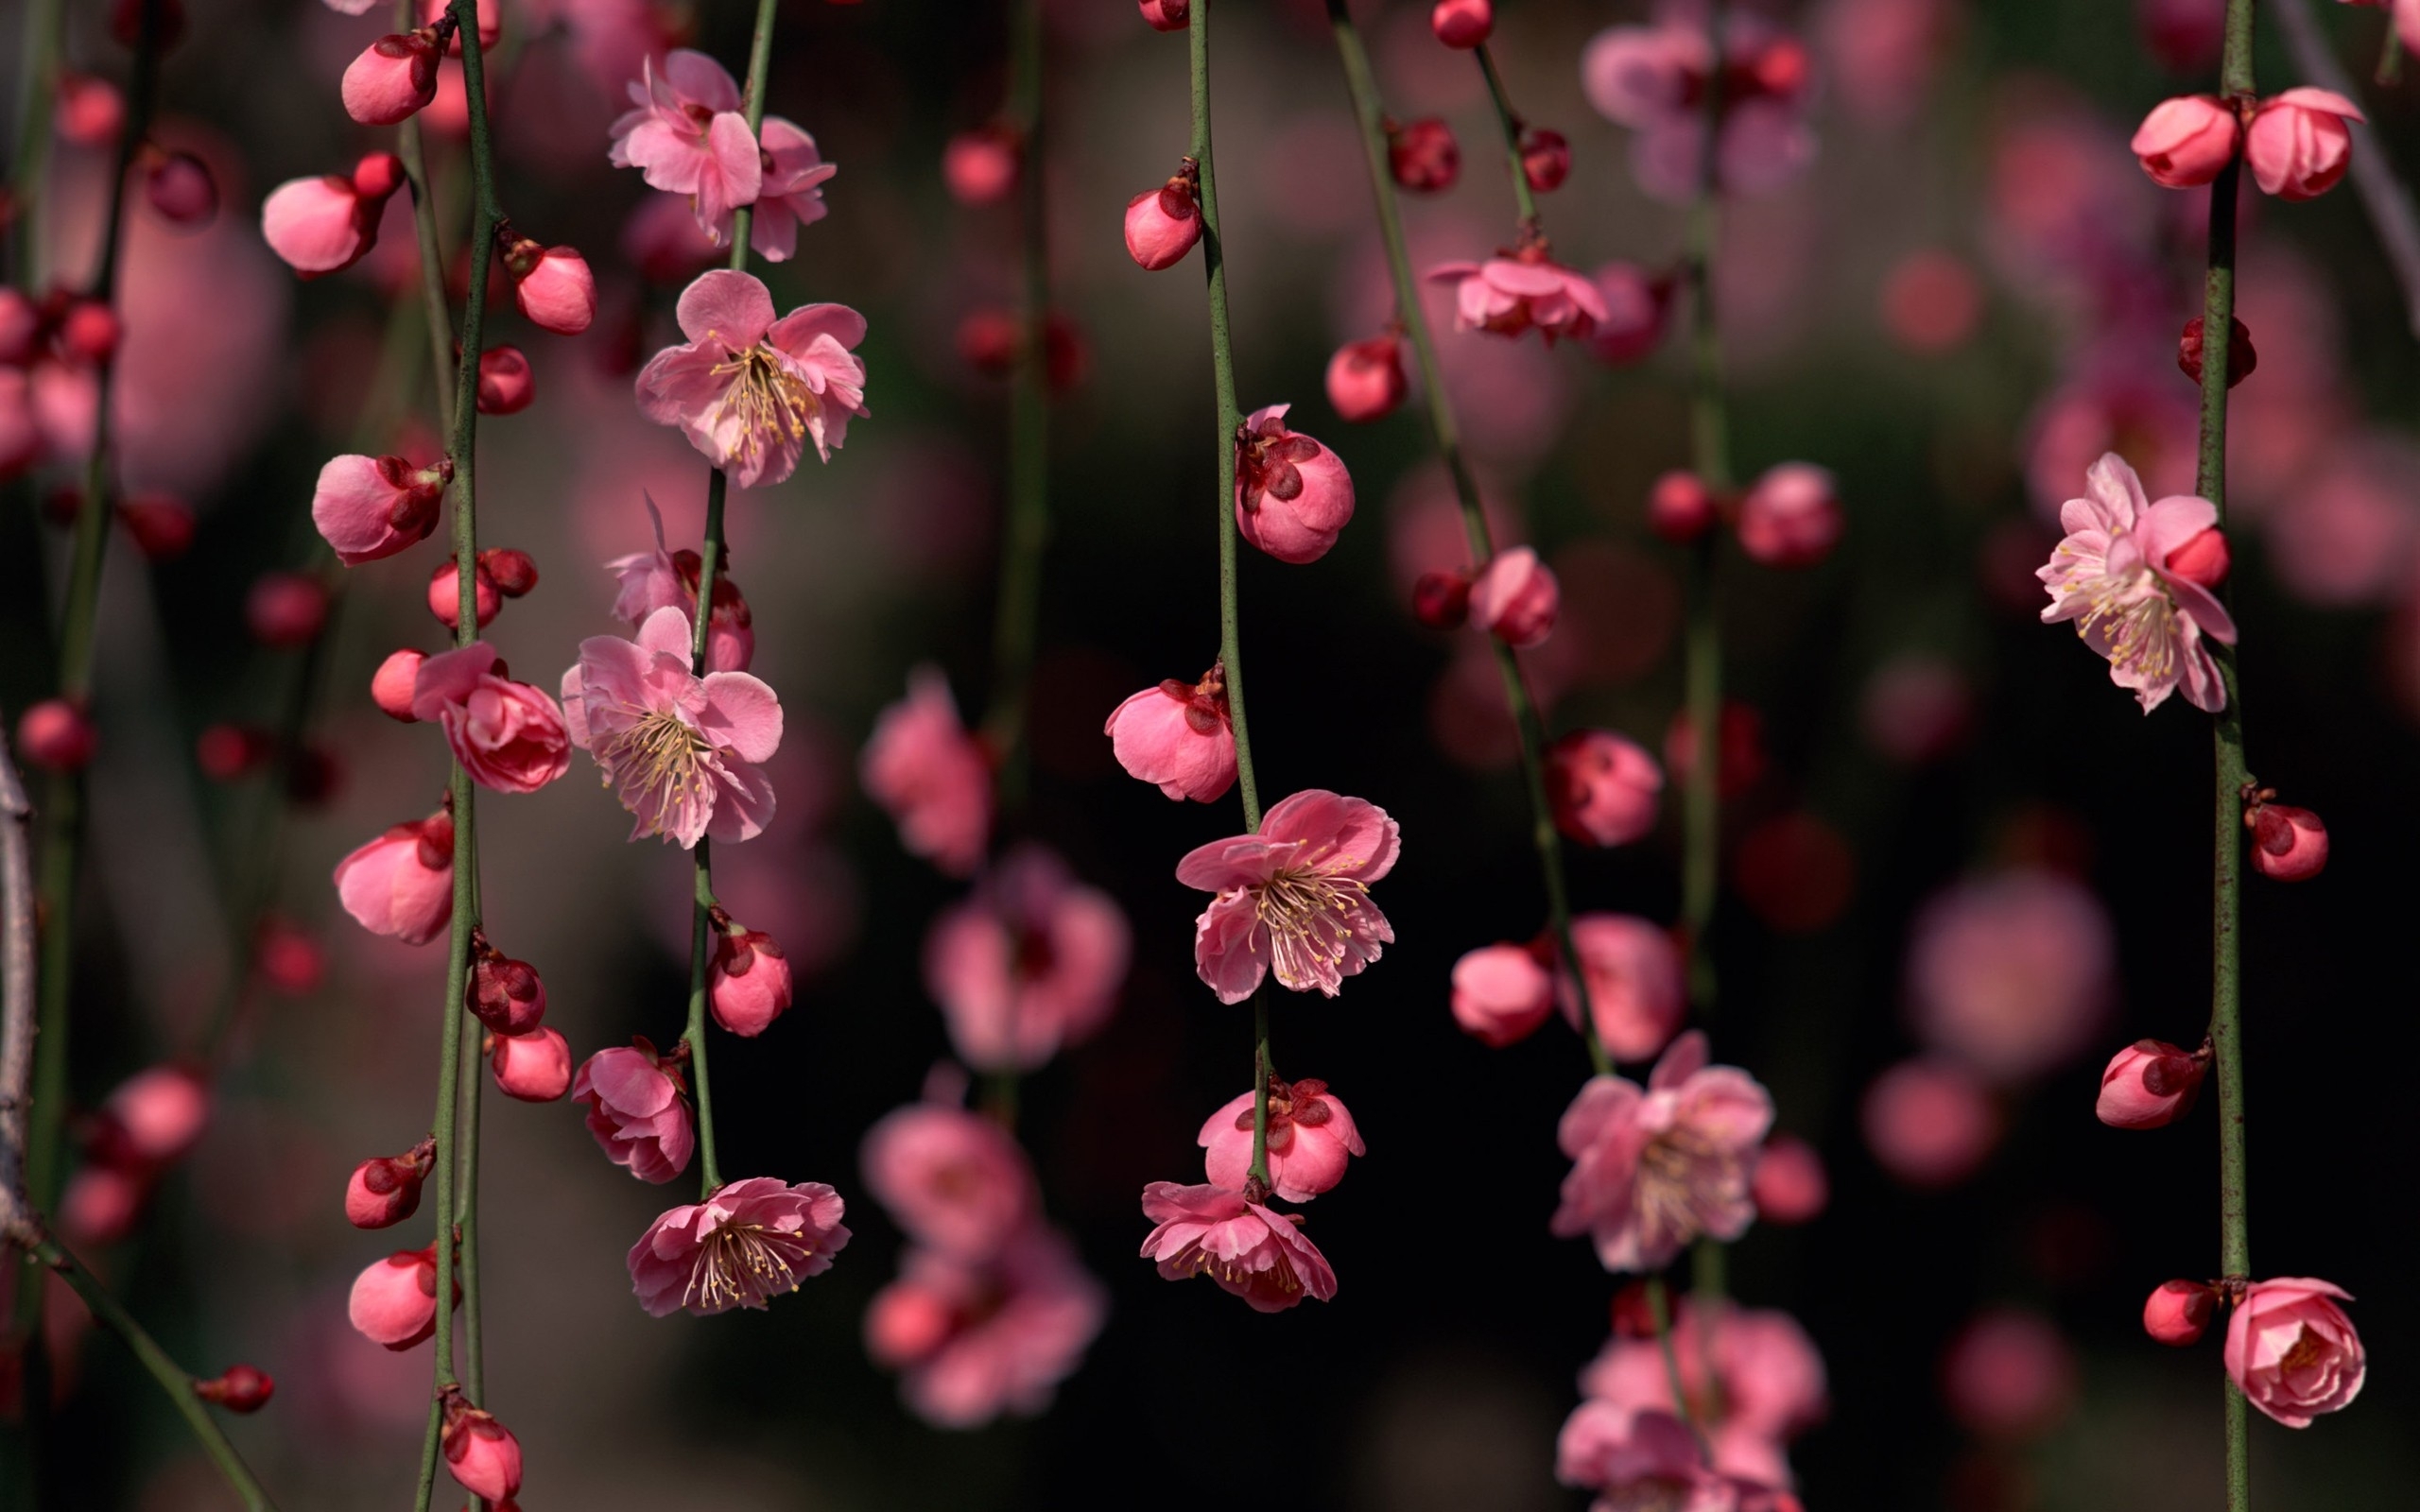 Nature Spring Blossoms Pink Sakura decorative cherry blossoms and their  flowers 4K HD Desktop Wallpaper for 4K Ultra HD Tv 2560x1600 :  